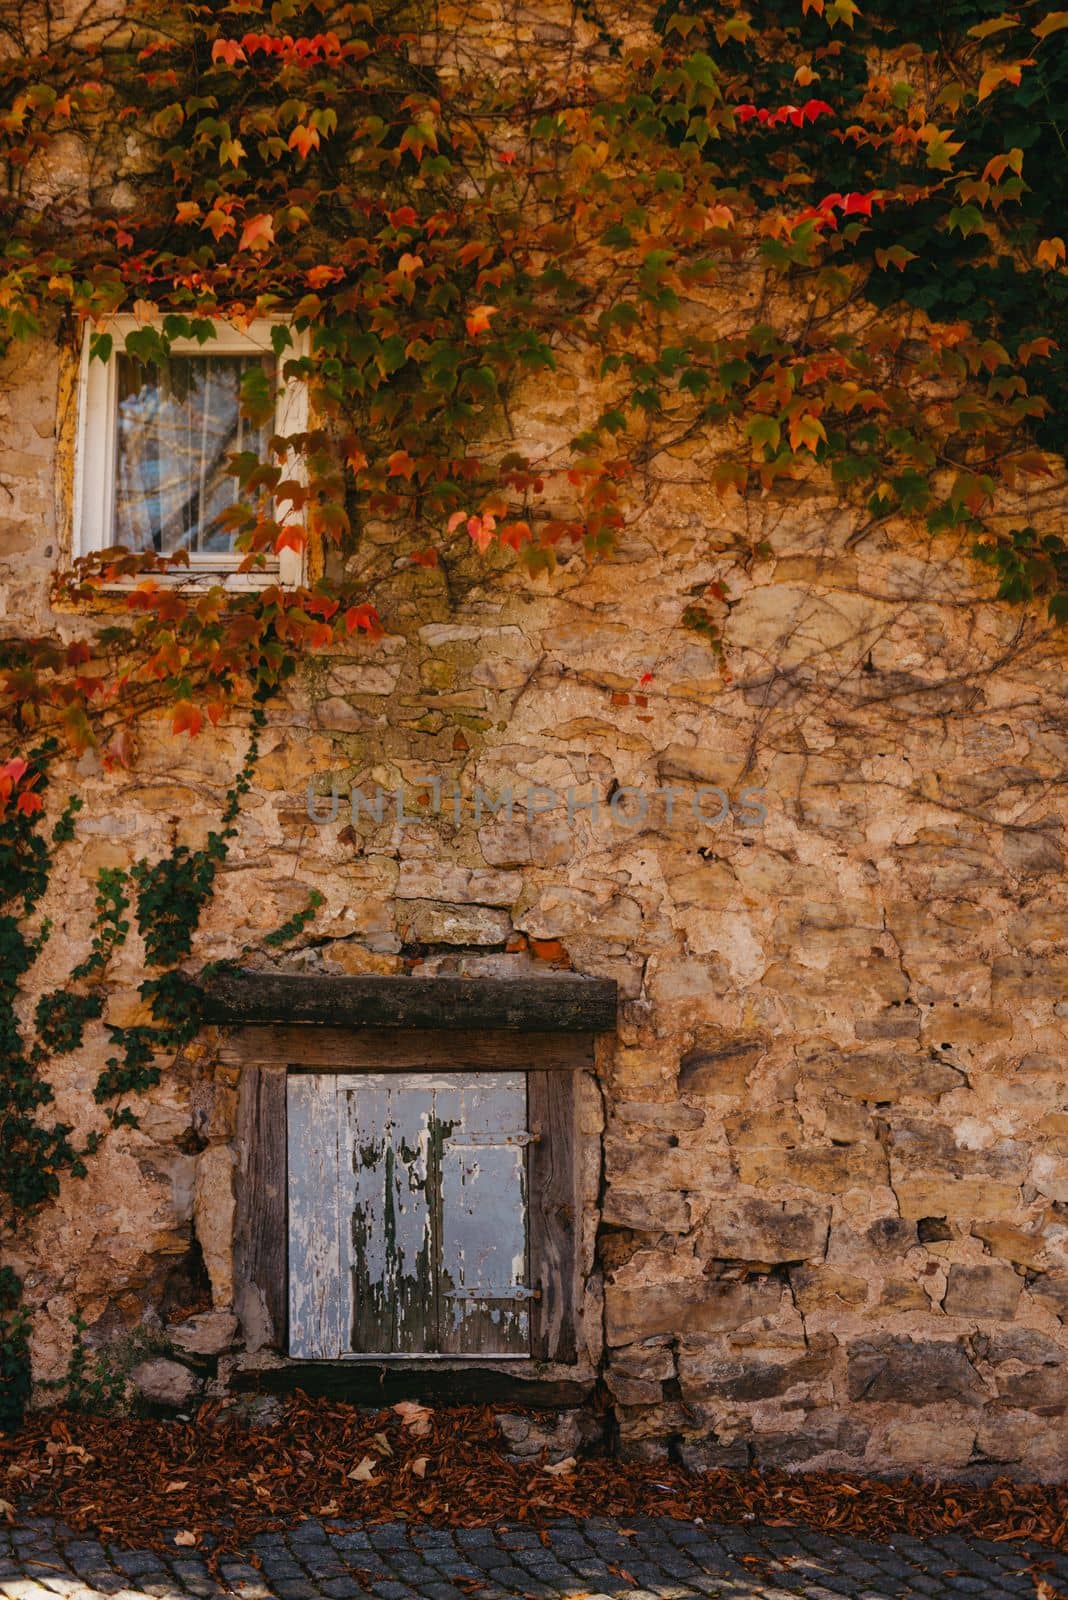 Old vintage rustic German shabby small house with colorful grapevine-covered wall. Autumn red leaves of Virginia creeper vine. Abstract Ancient overgrown house with blue wooden window and door. by Andrii_Ko